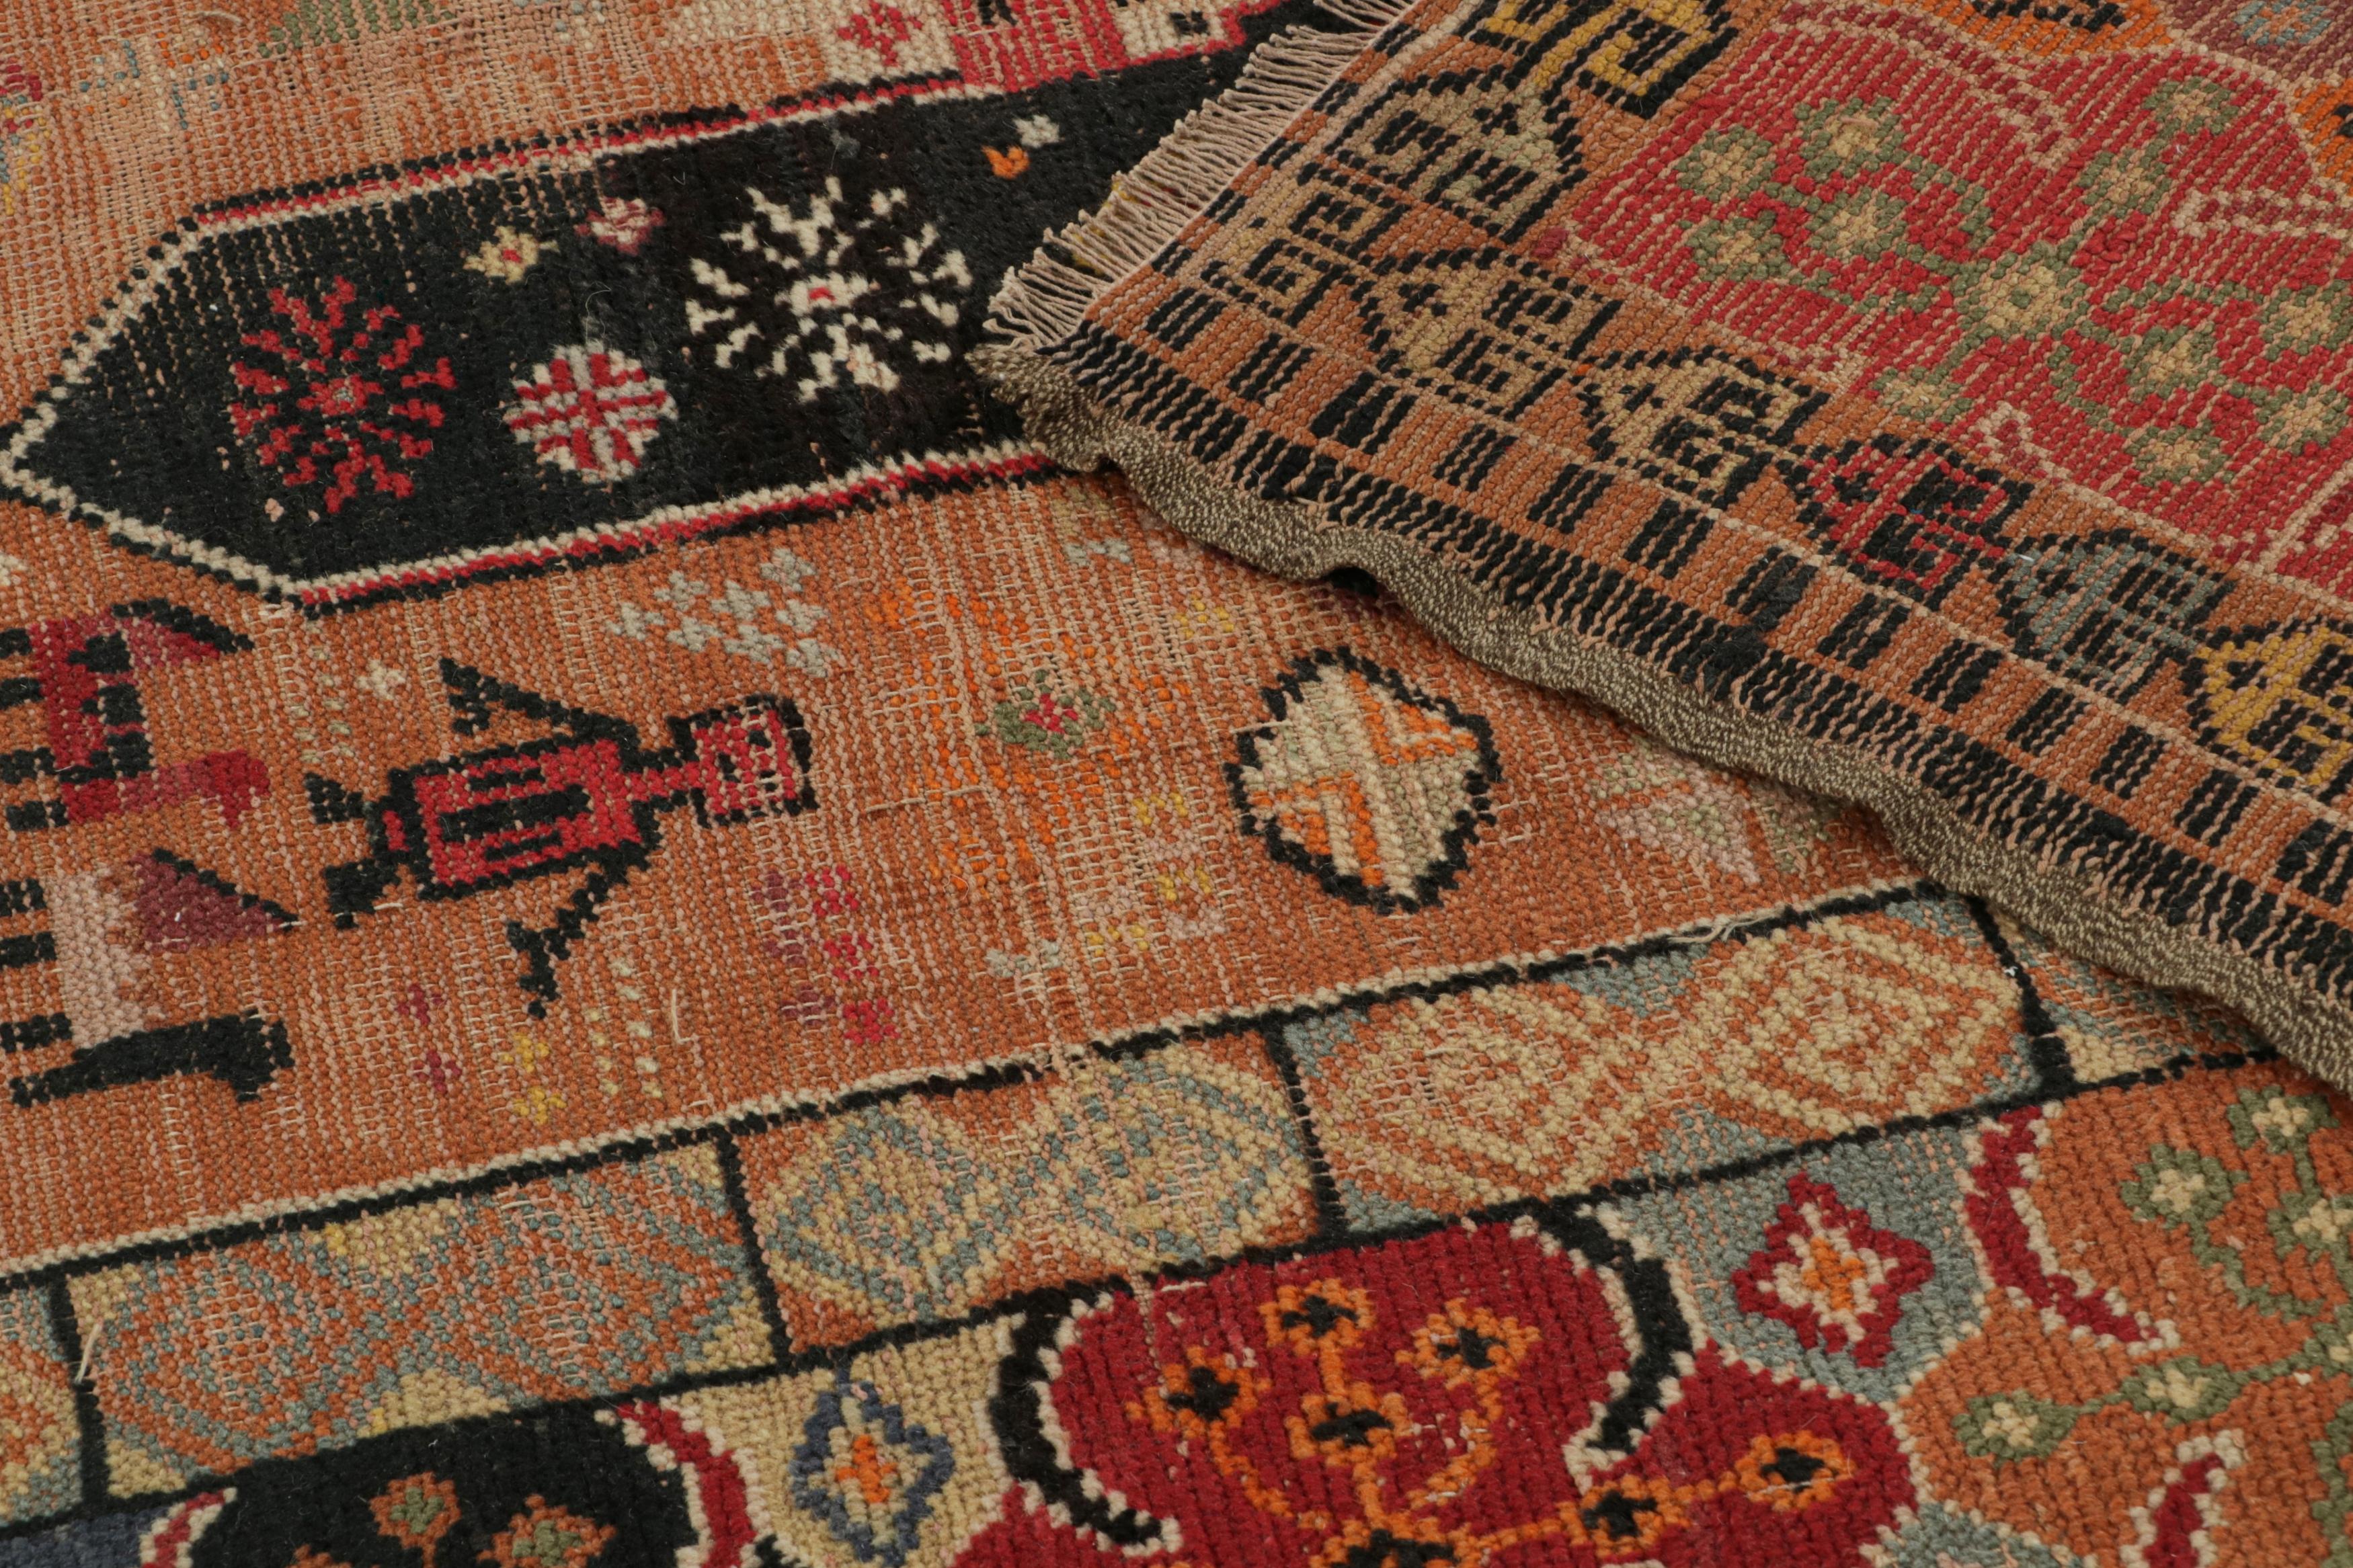 1890s Antique European Rug with Colorful Geometric Patterns, from Rug & Kilim For Sale 1